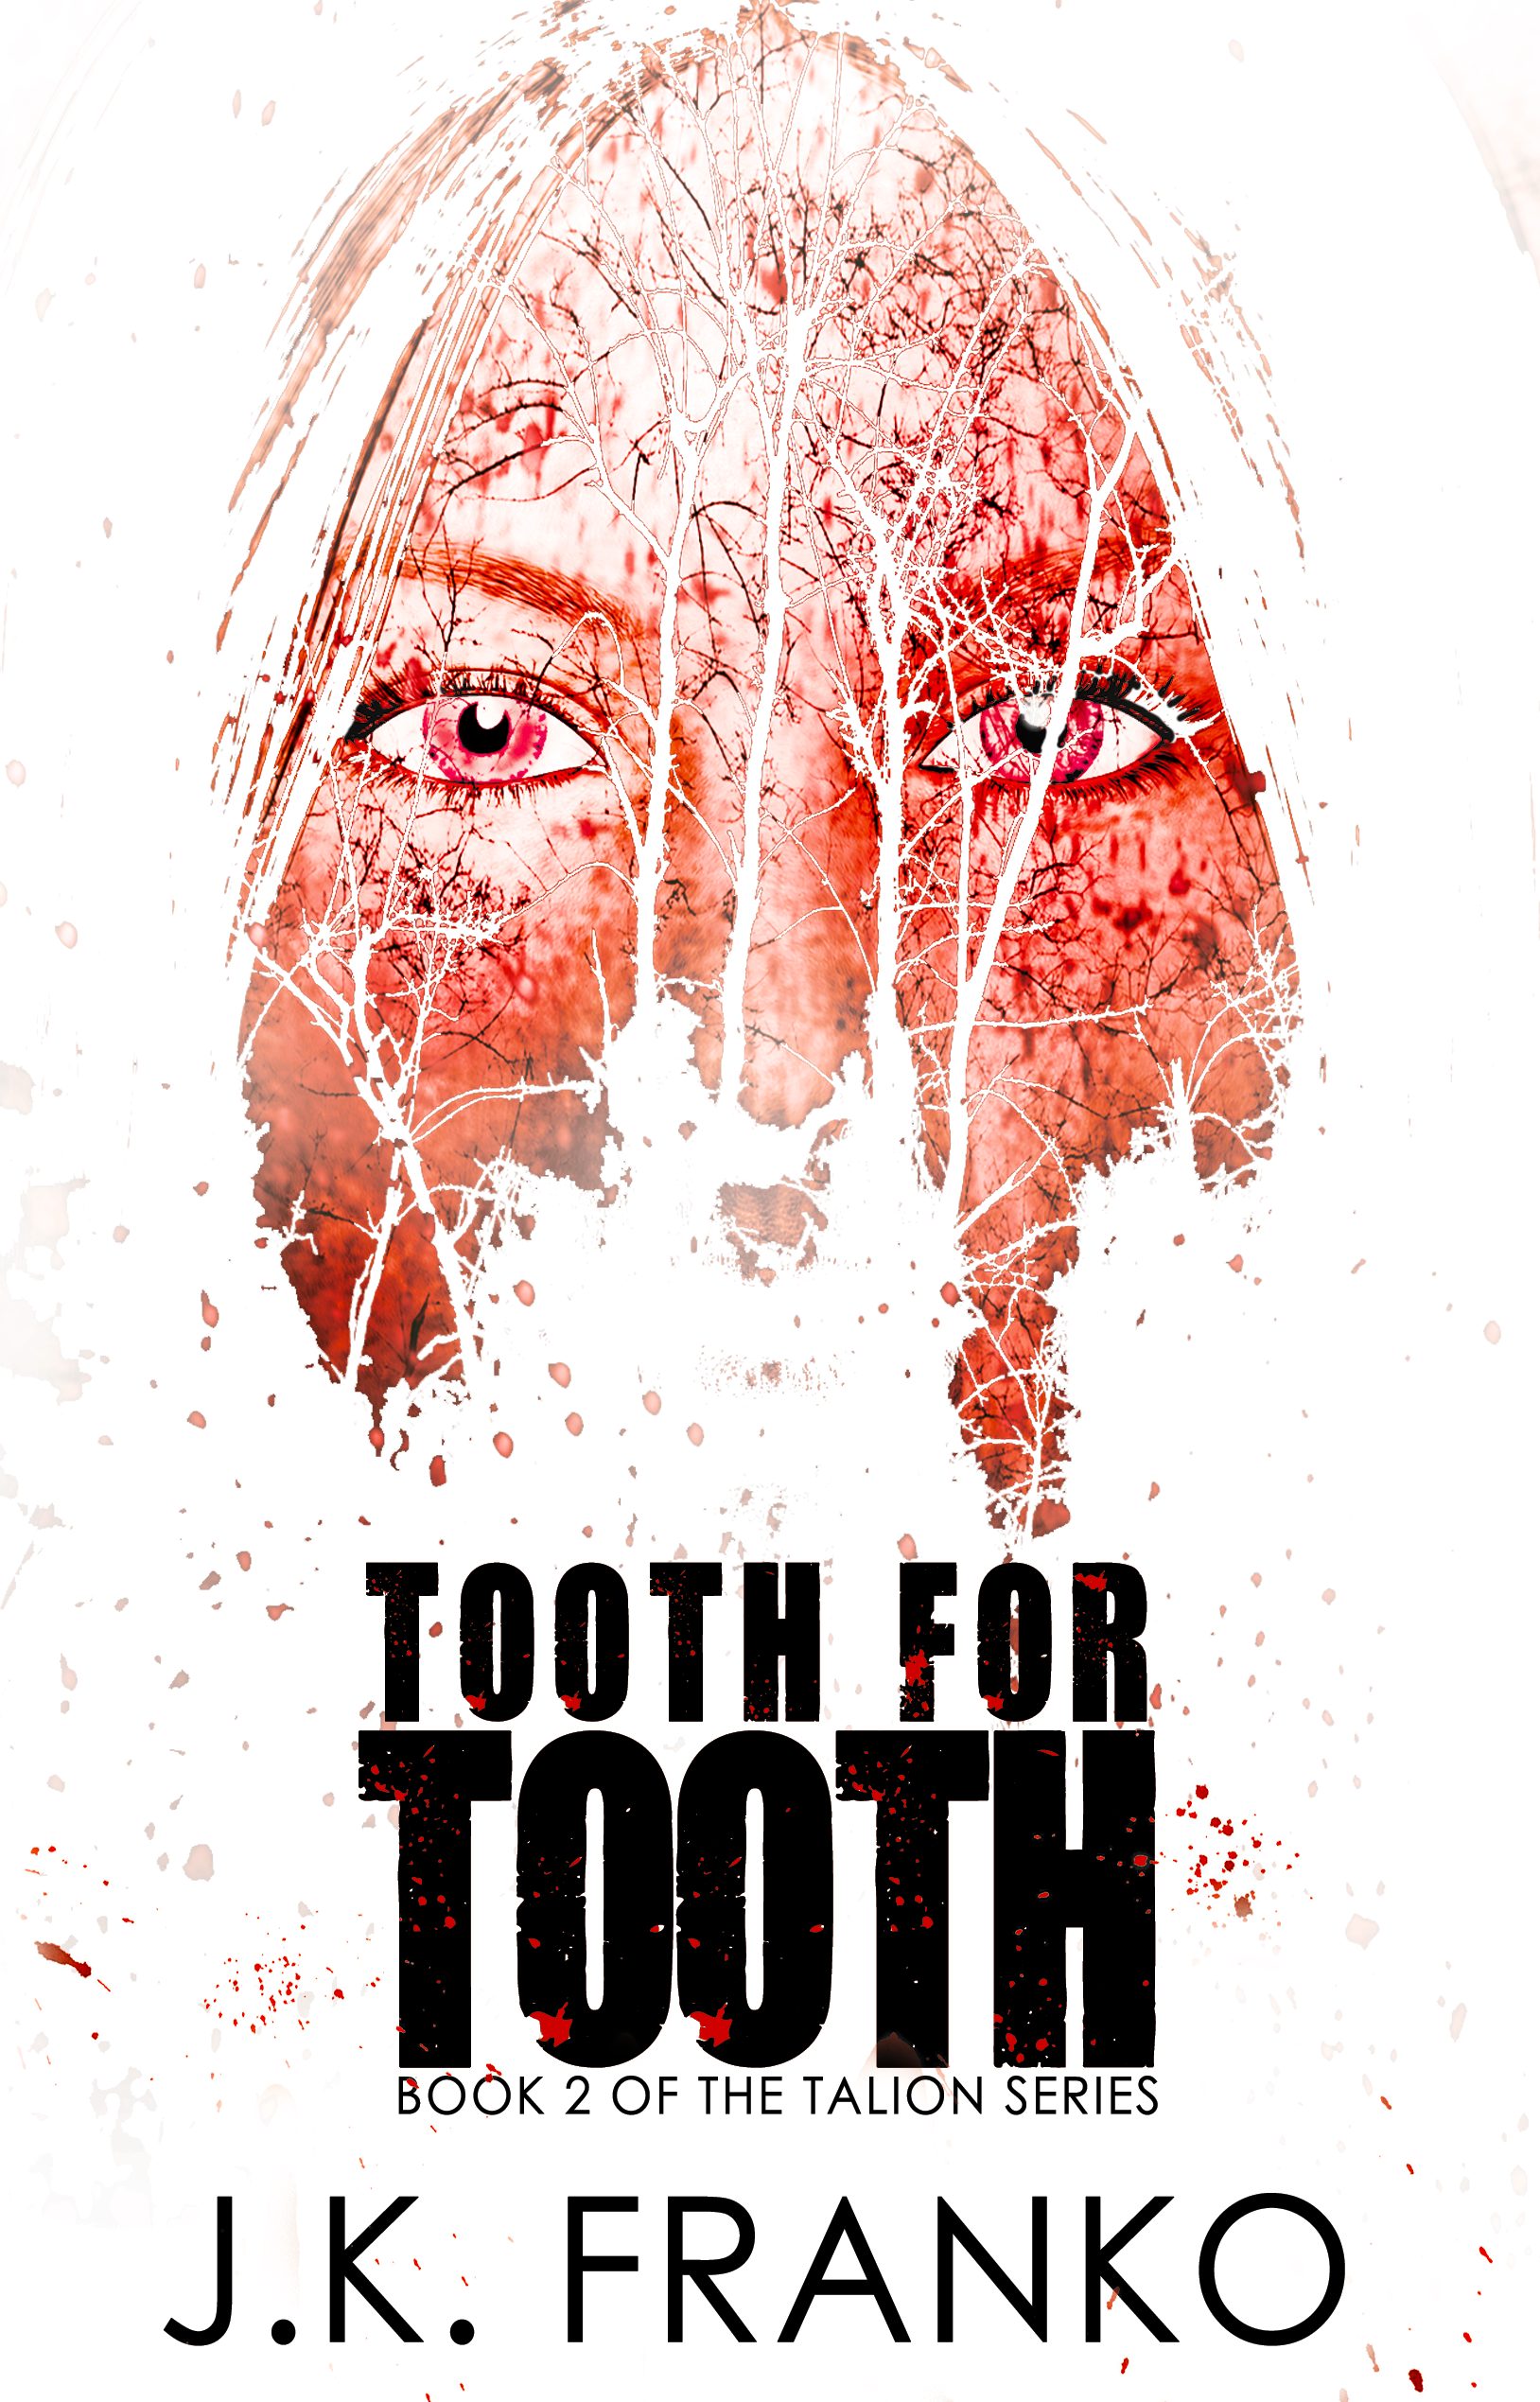 Eye For Eye Trilogy, Book 2 - Tooth for Tooth by JK Franko